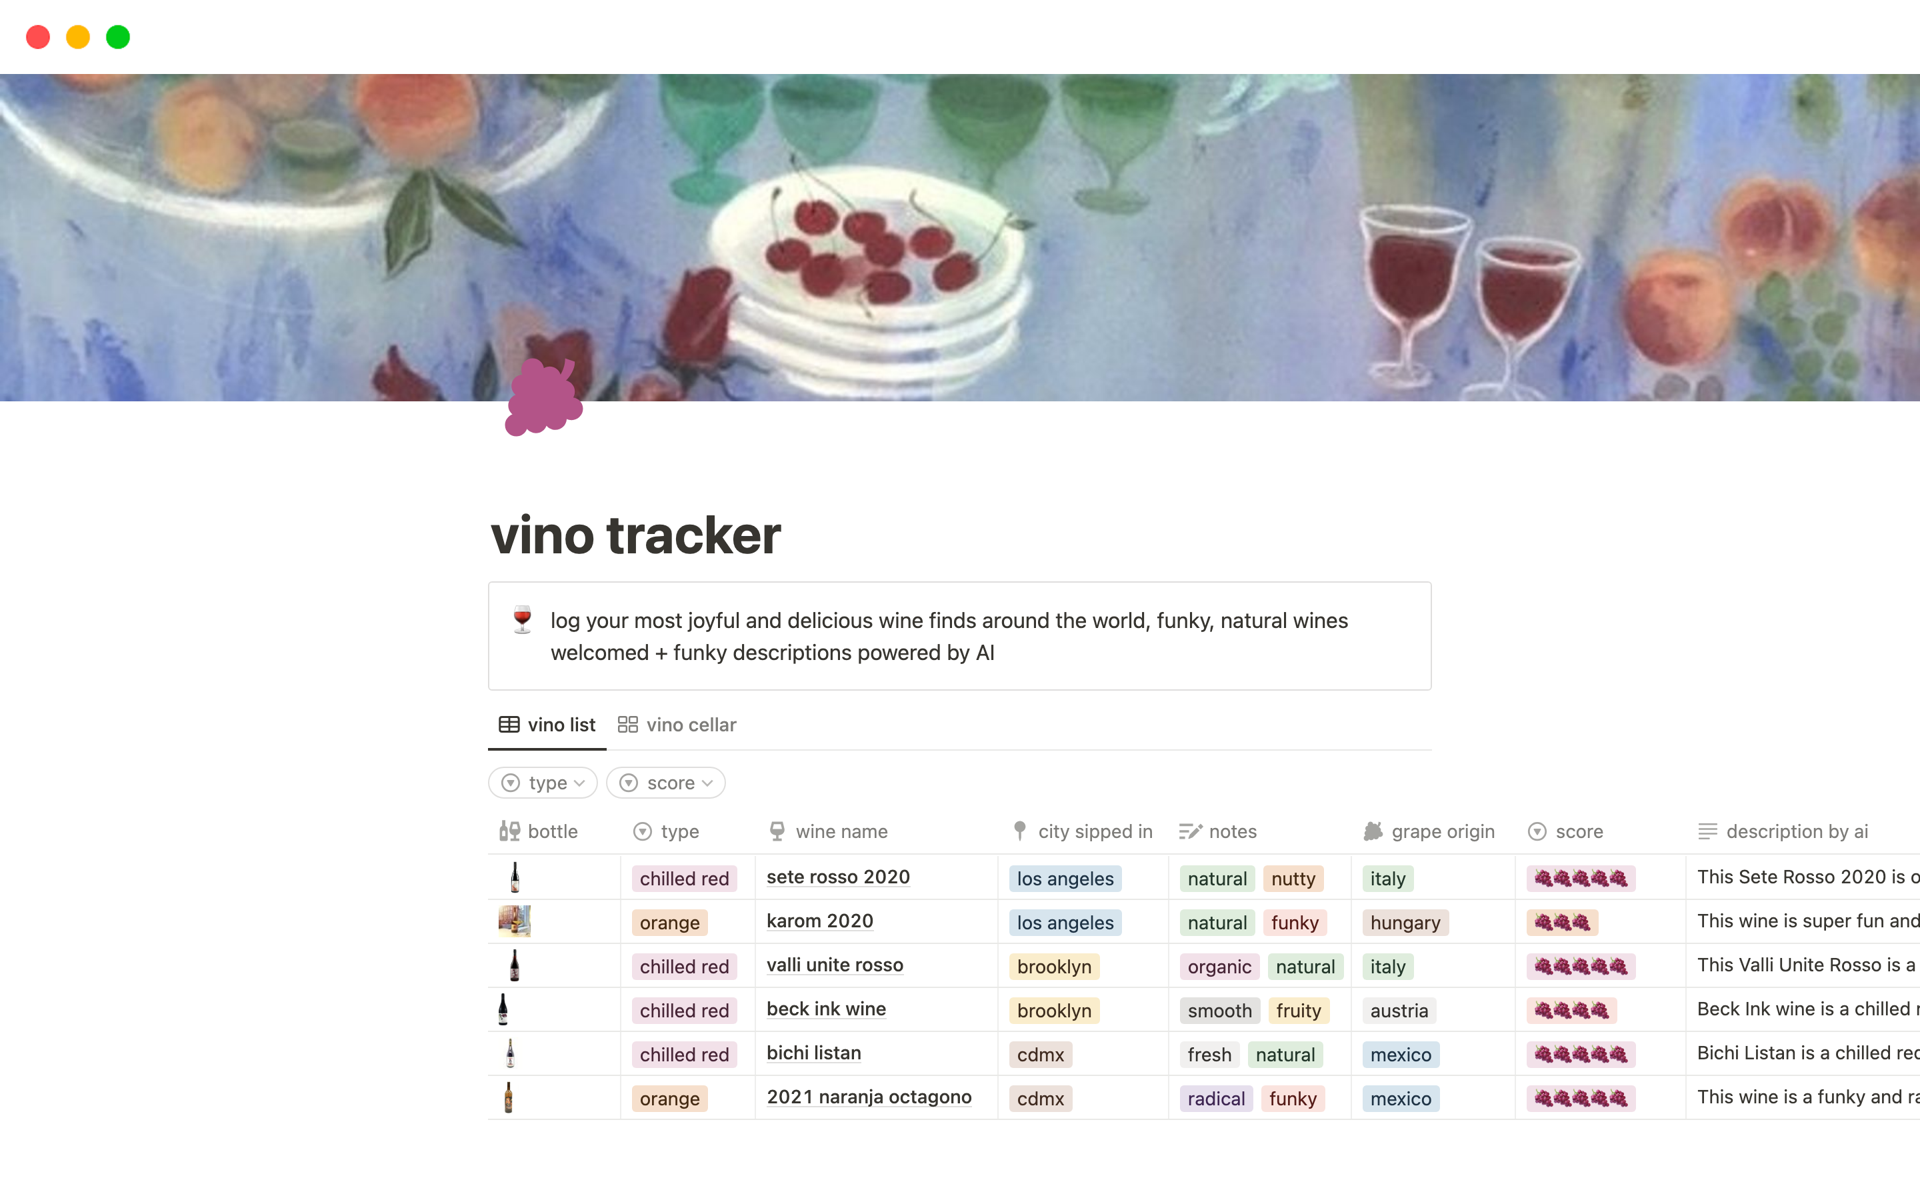 Log your most joyful and delicious wine-finds around the world. Capture everything essential: the winemaker, grape origin, where you sipped it, tasting notes, and general feels. Funky, natural wines welcomed + funky, friendly descriptions powered by AI.